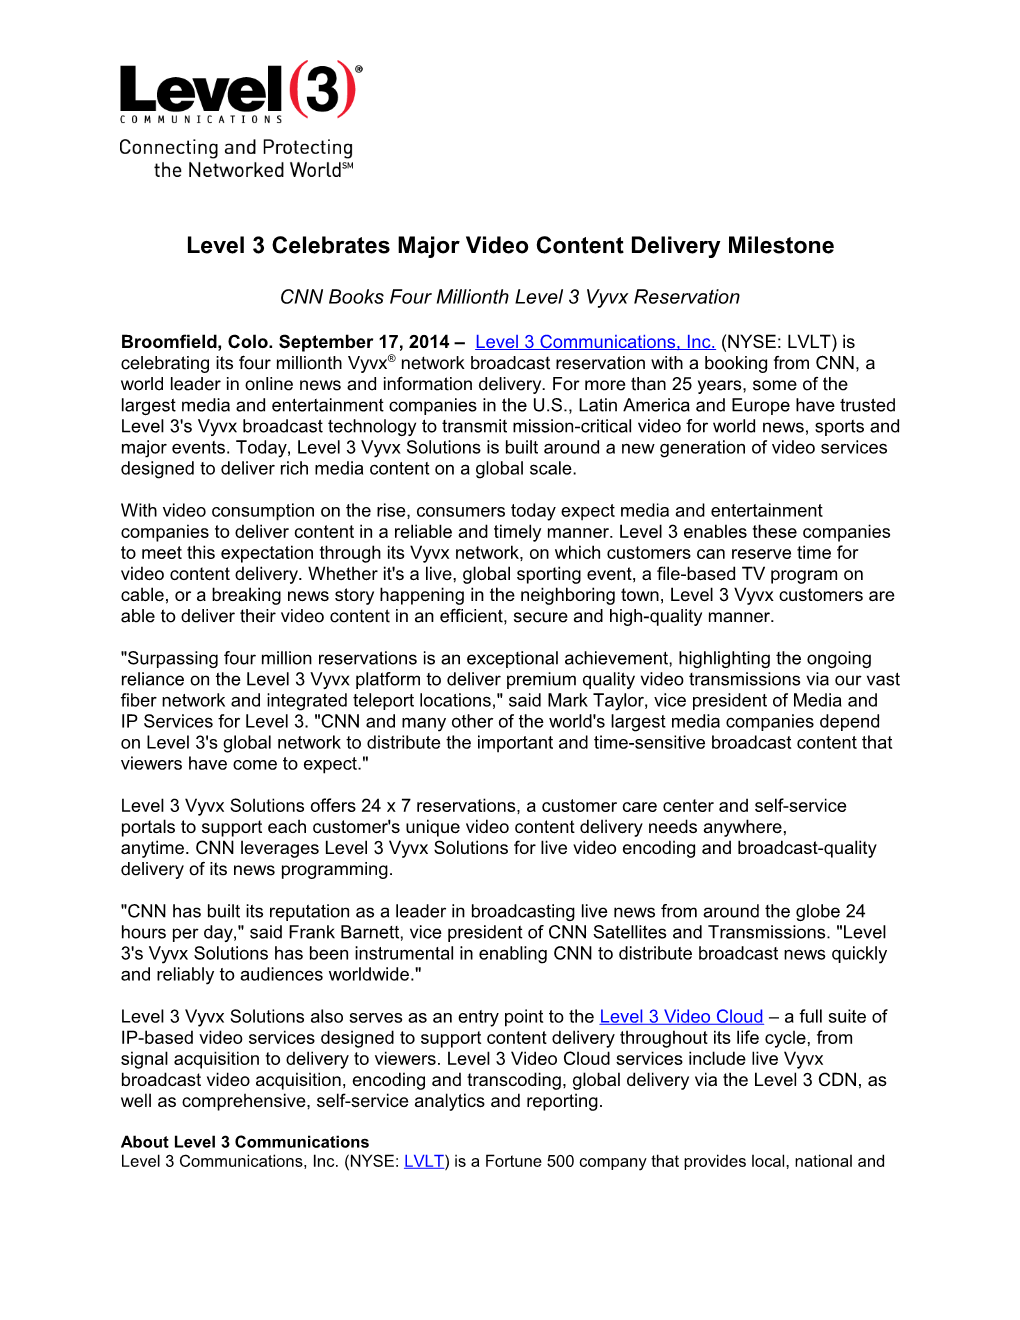 Level 3 to Deliver Voice and Data Services to Revived Council of the Administrative Conference